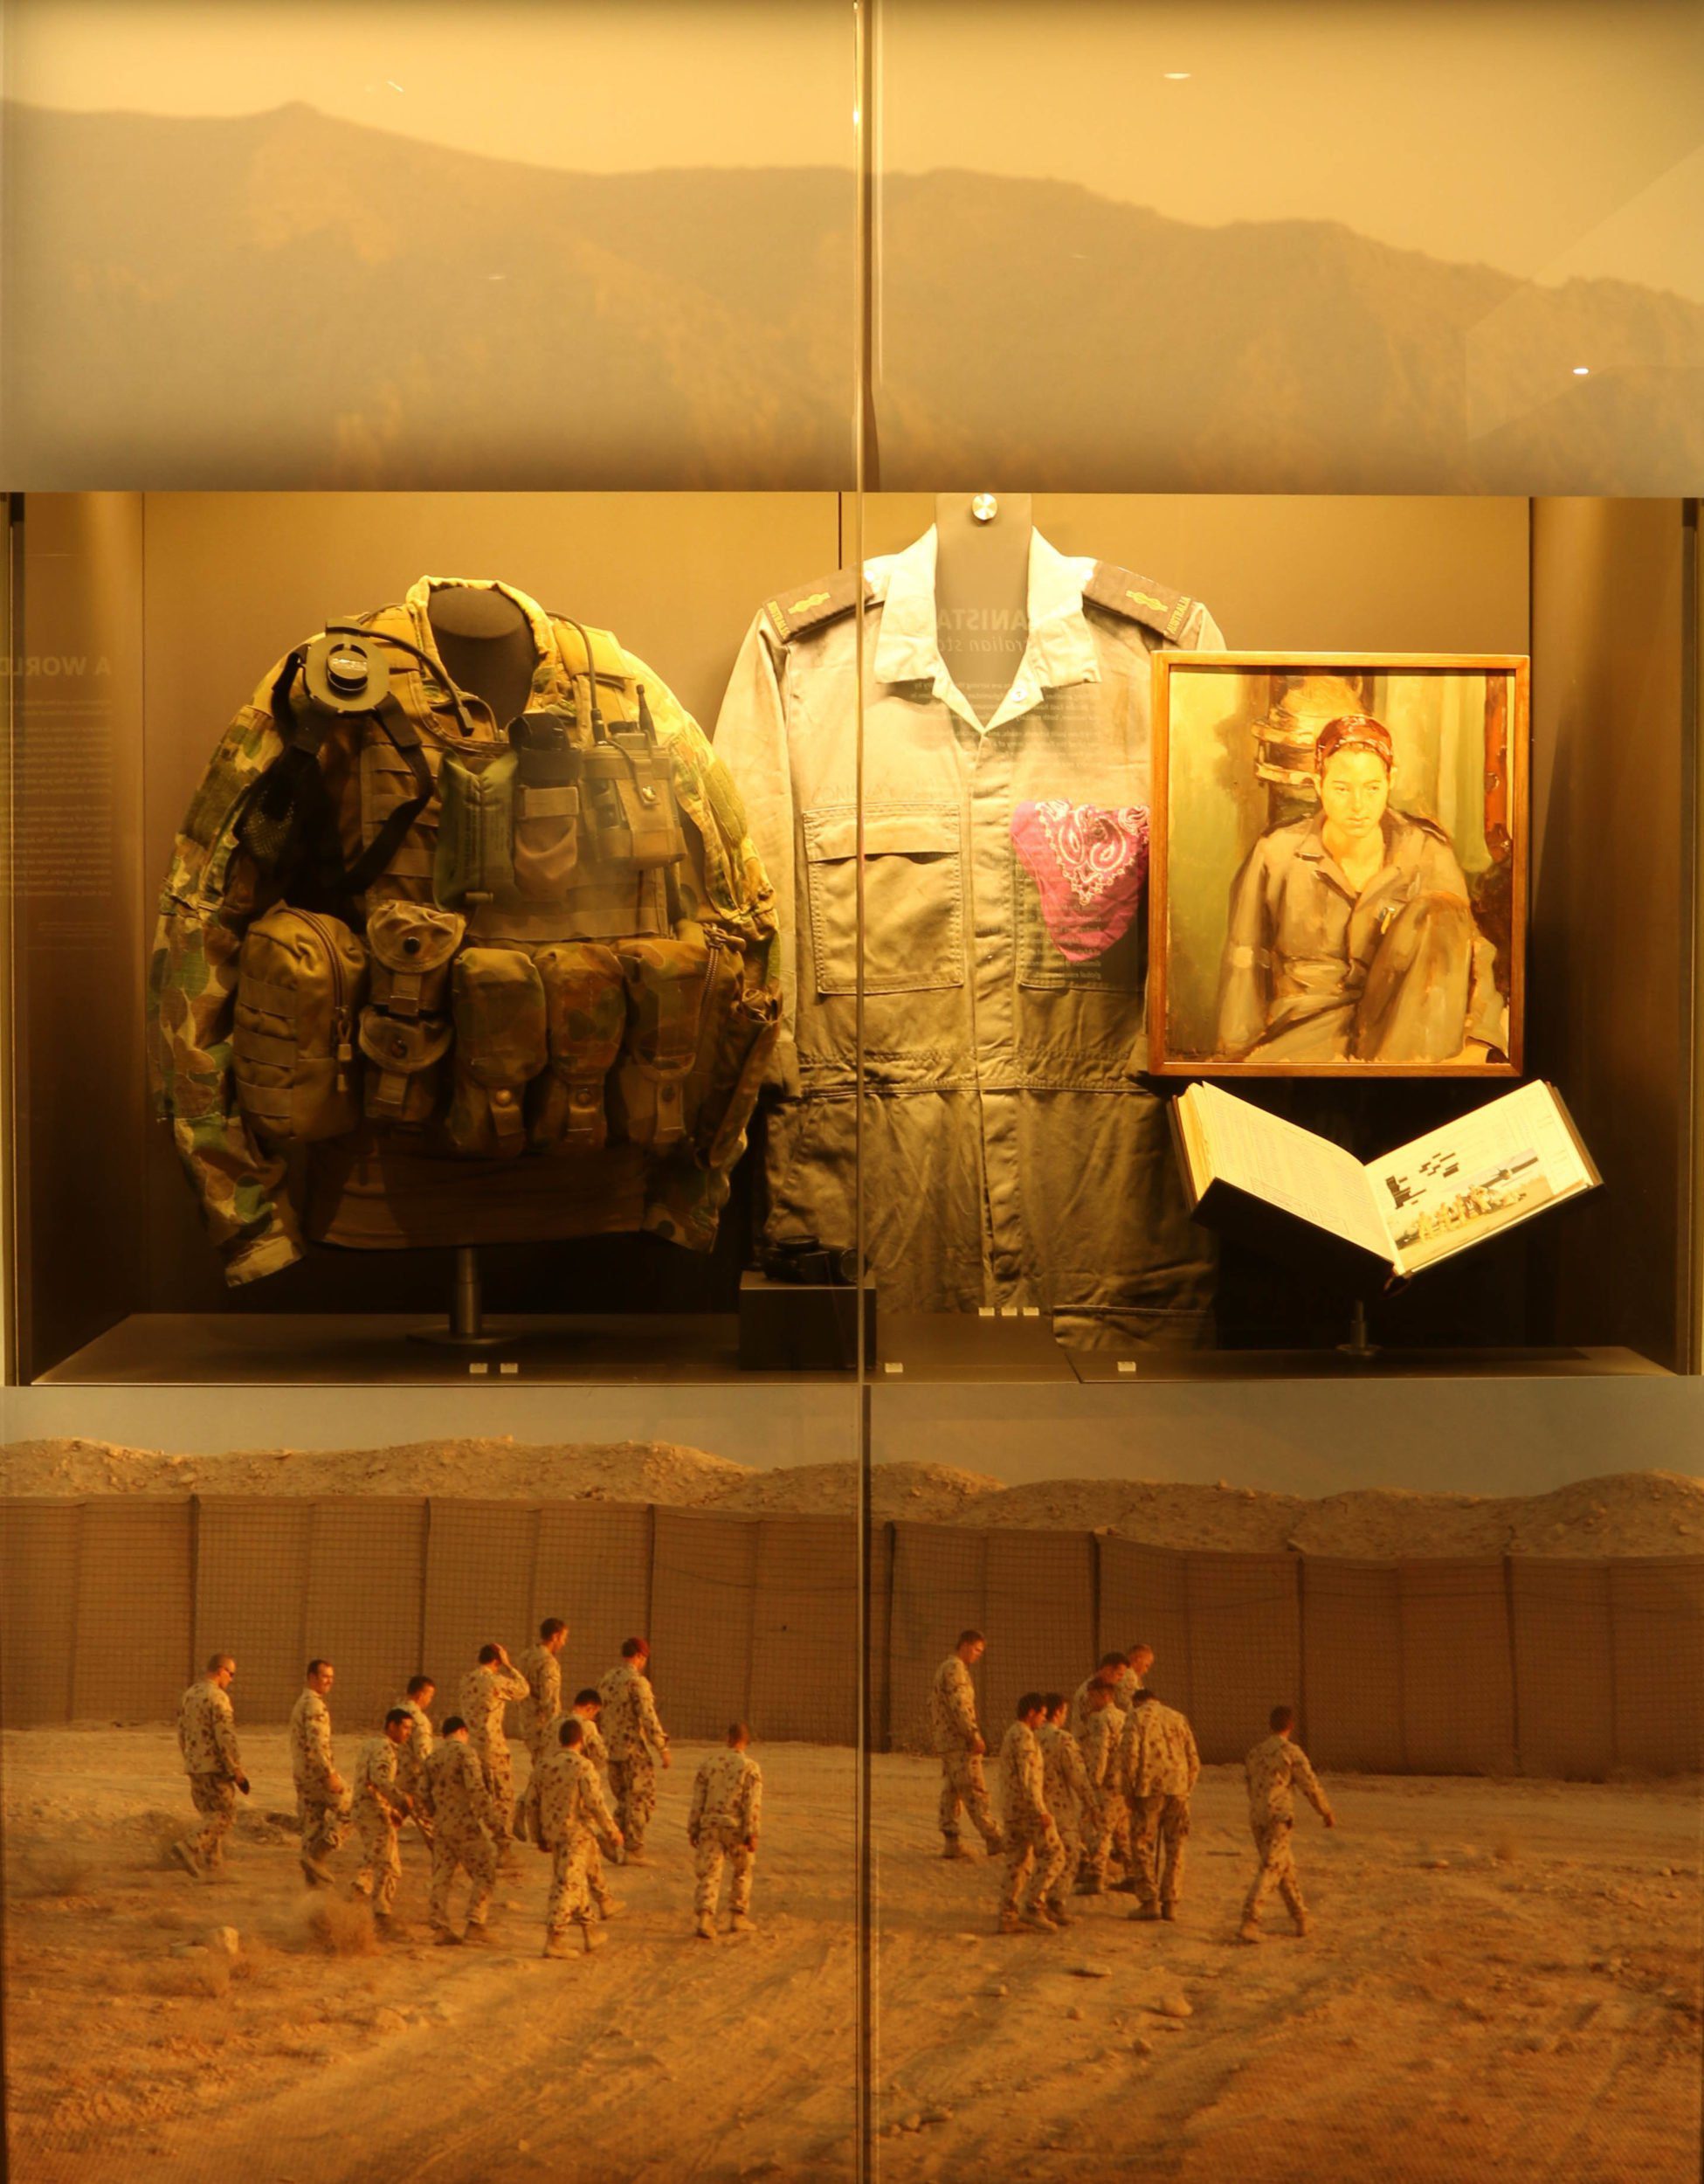 Afghanistan Exhibition at the Australian War Memorial in Canberra